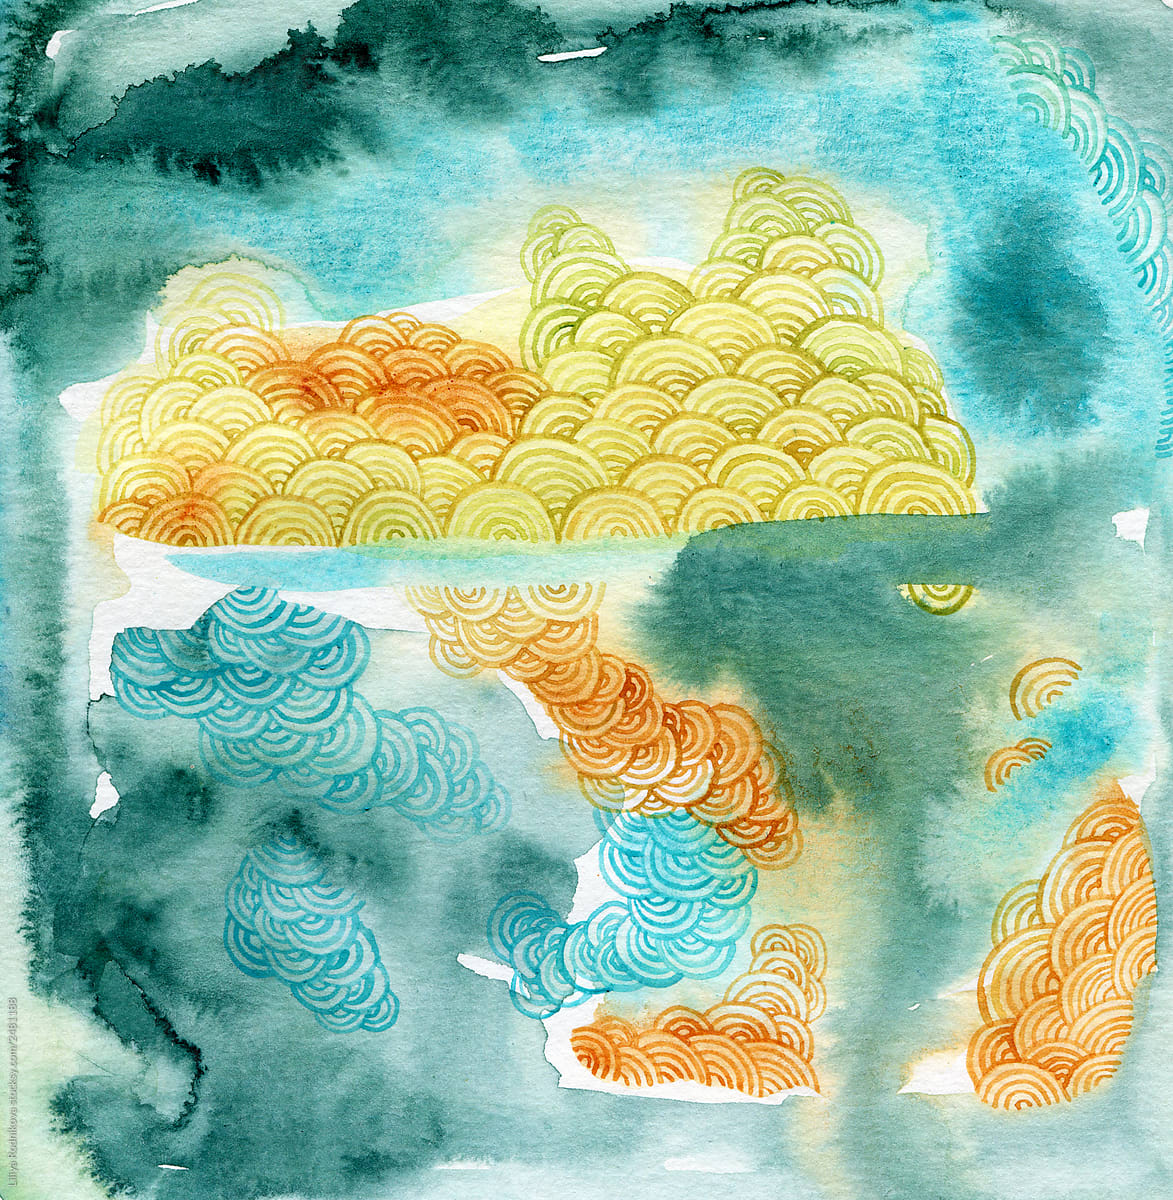 Watercolor painting in greens, blues and yellow